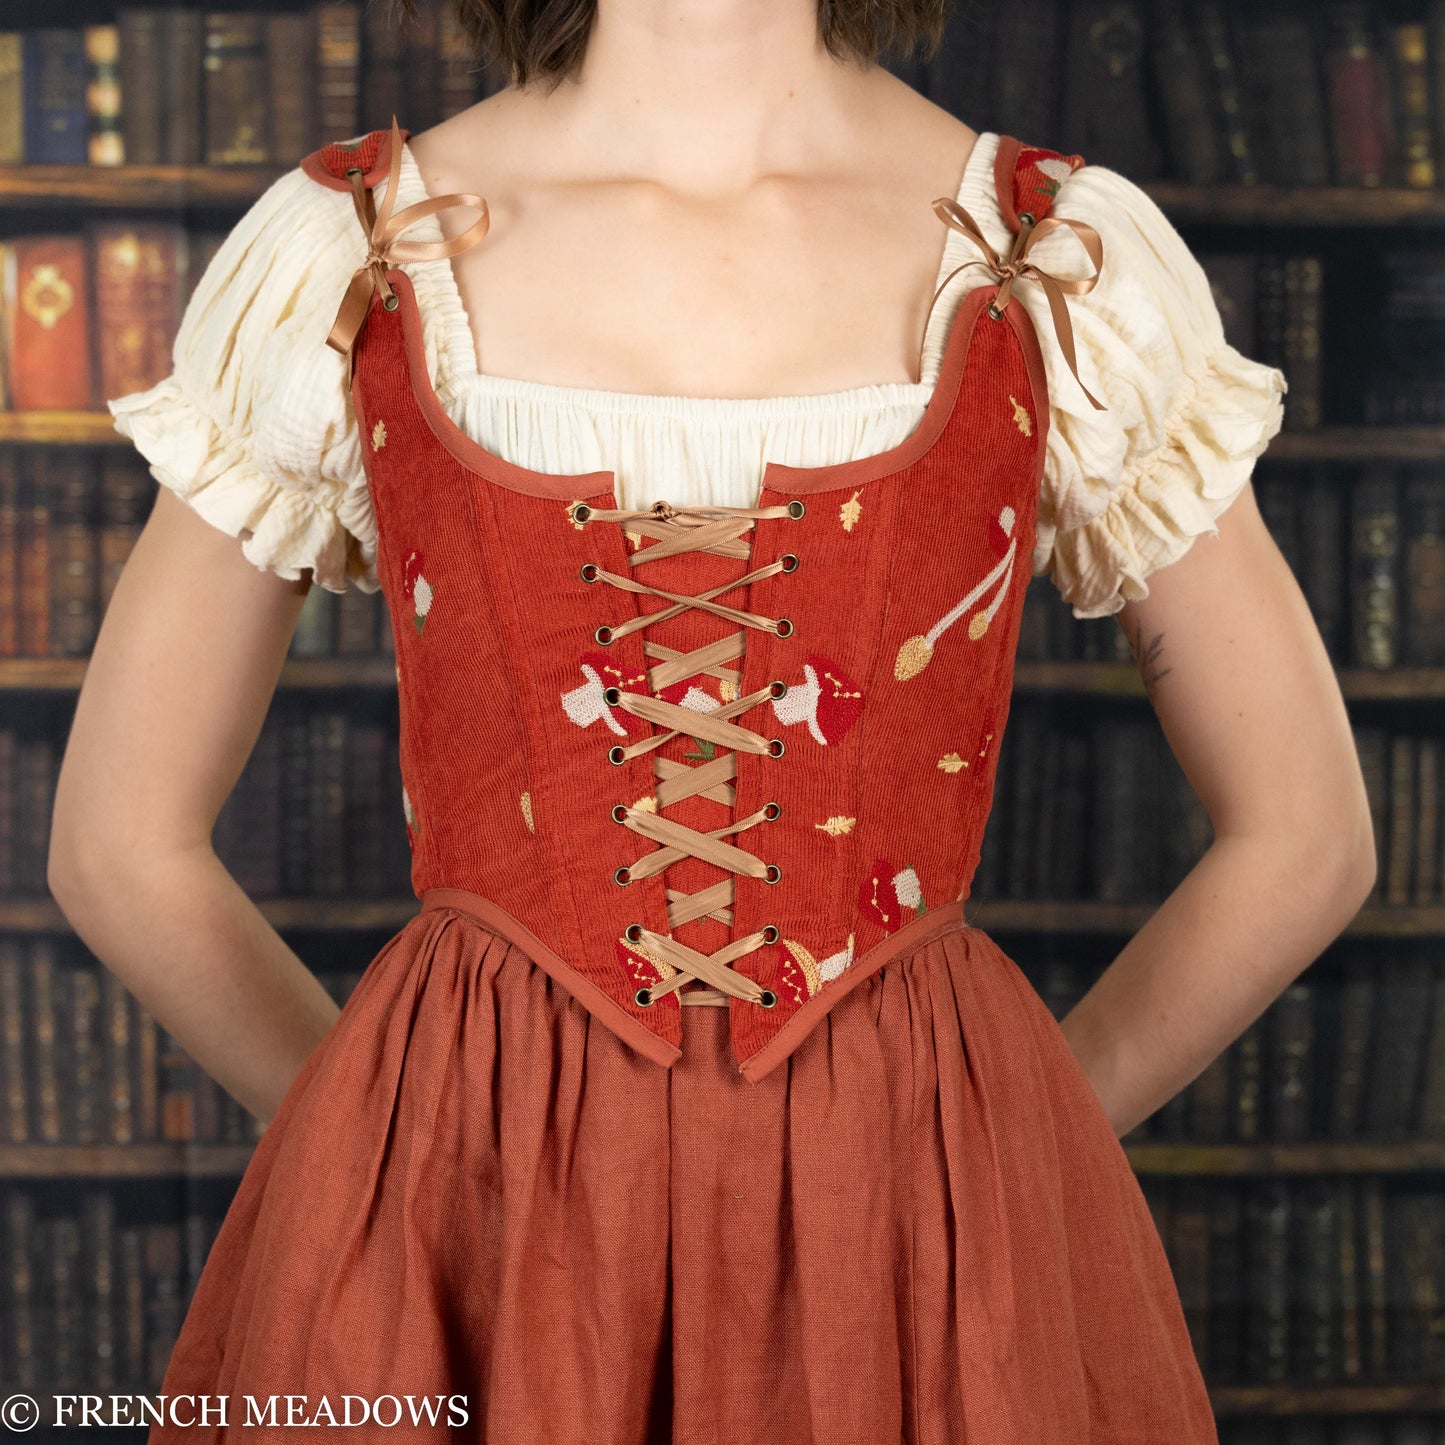 Load image into Gallery viewer, READY TO SHIP Embroidered Mushroom Renaissance Bodice
